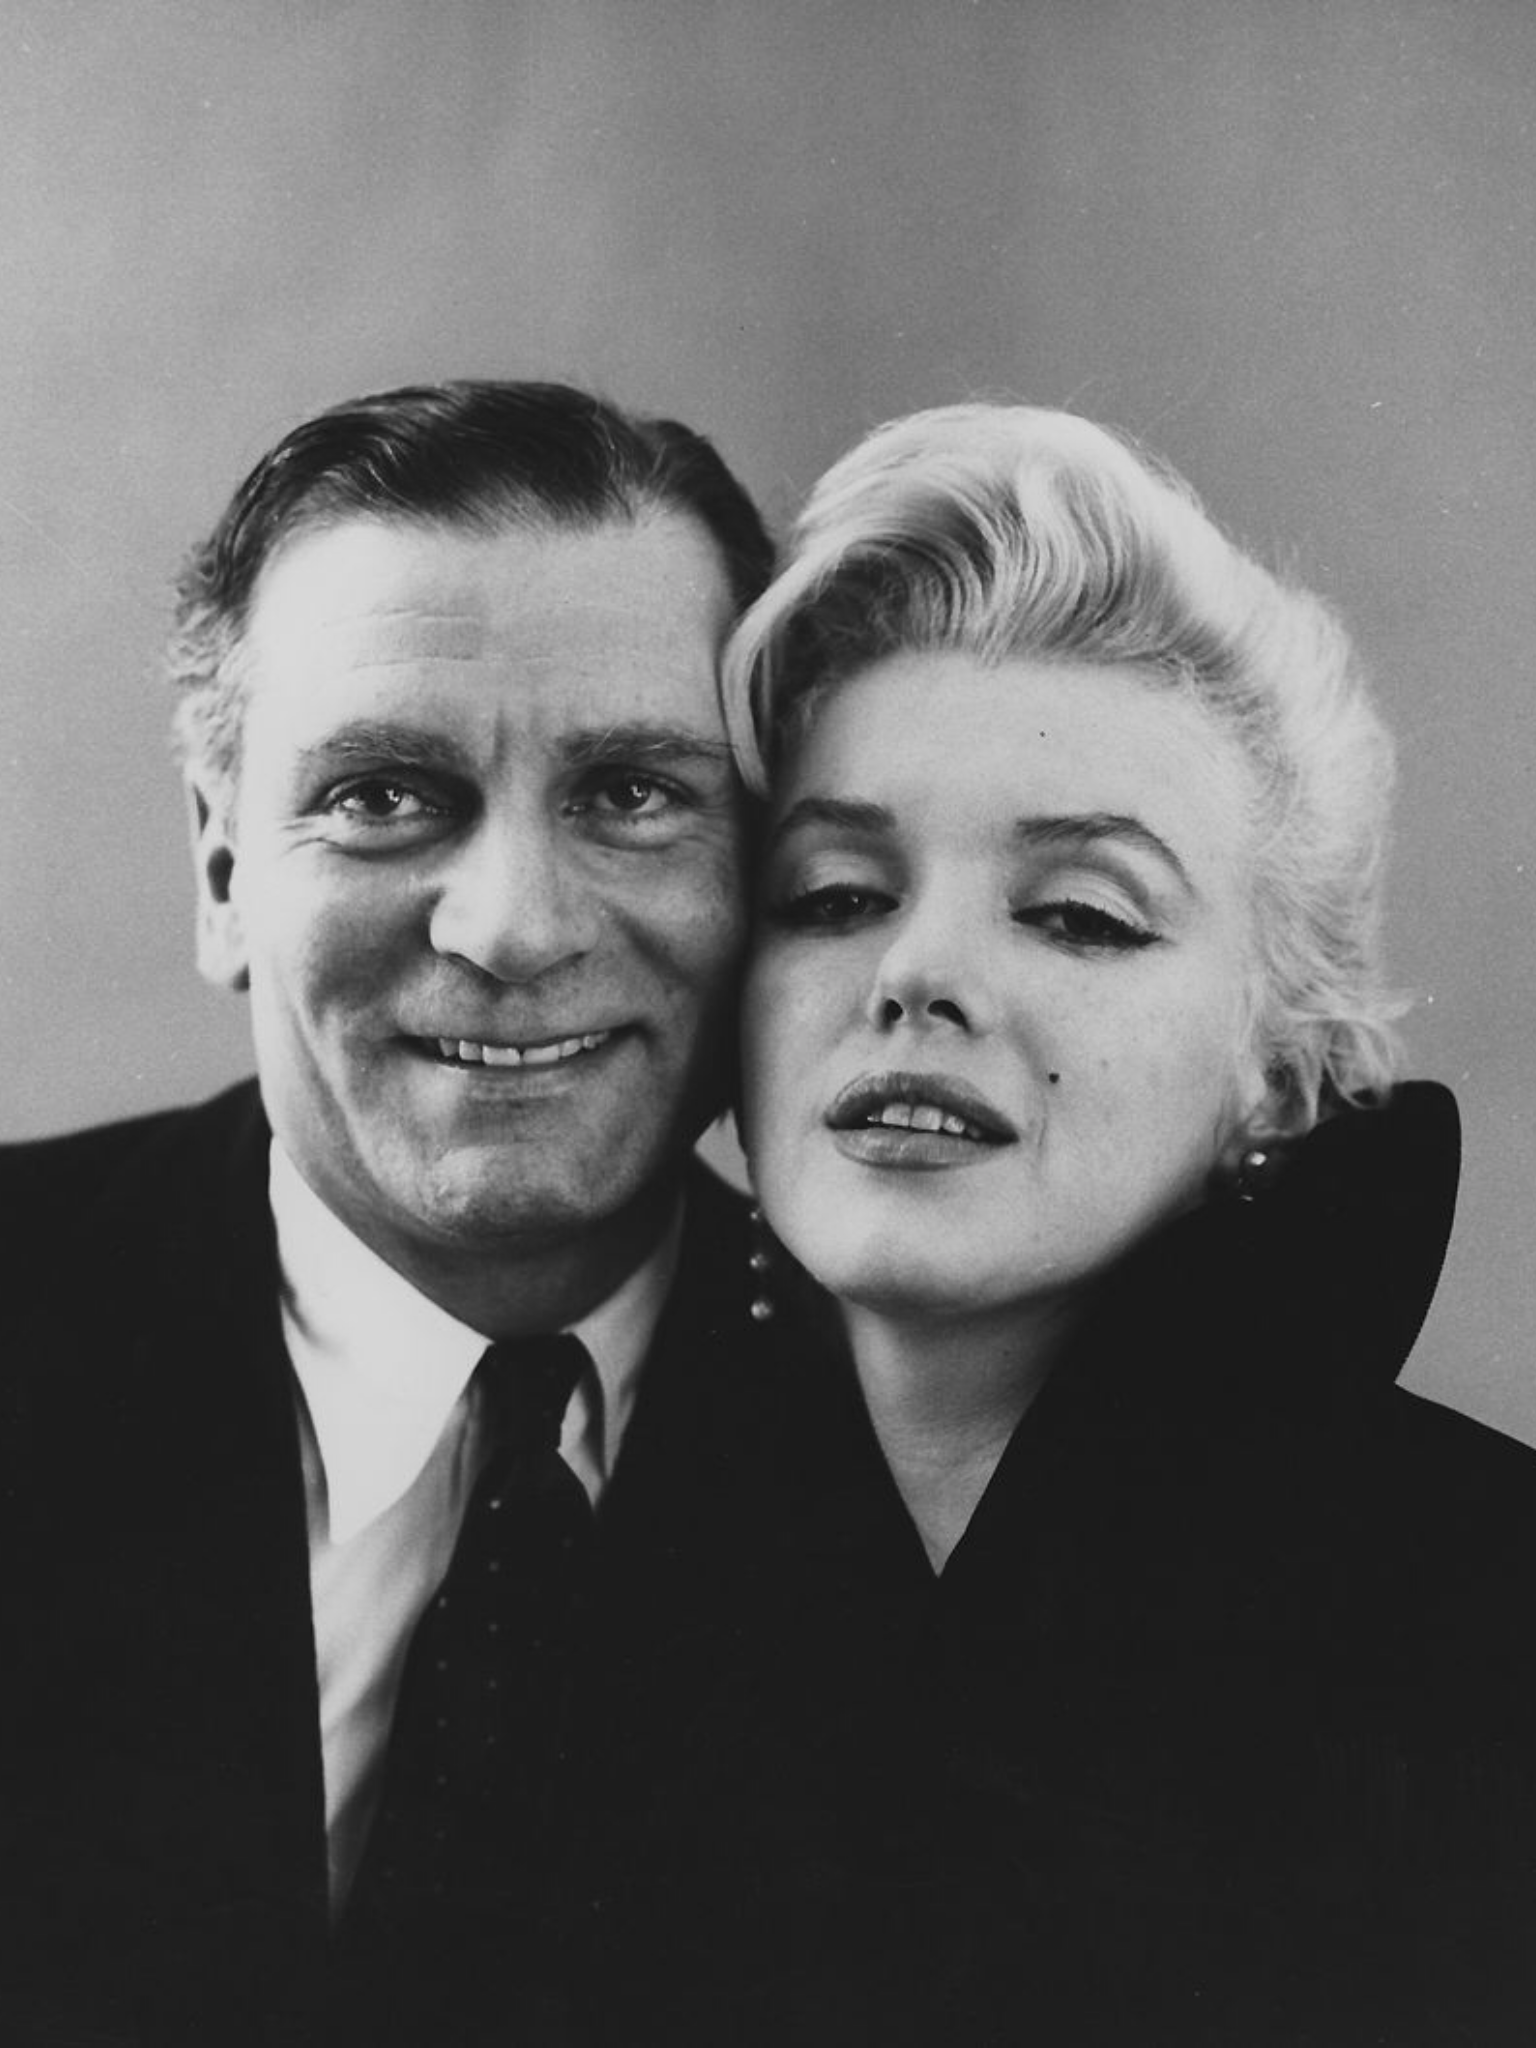 Laurence Olivier and Marilyn Monroe photographed by Milton H. Greene